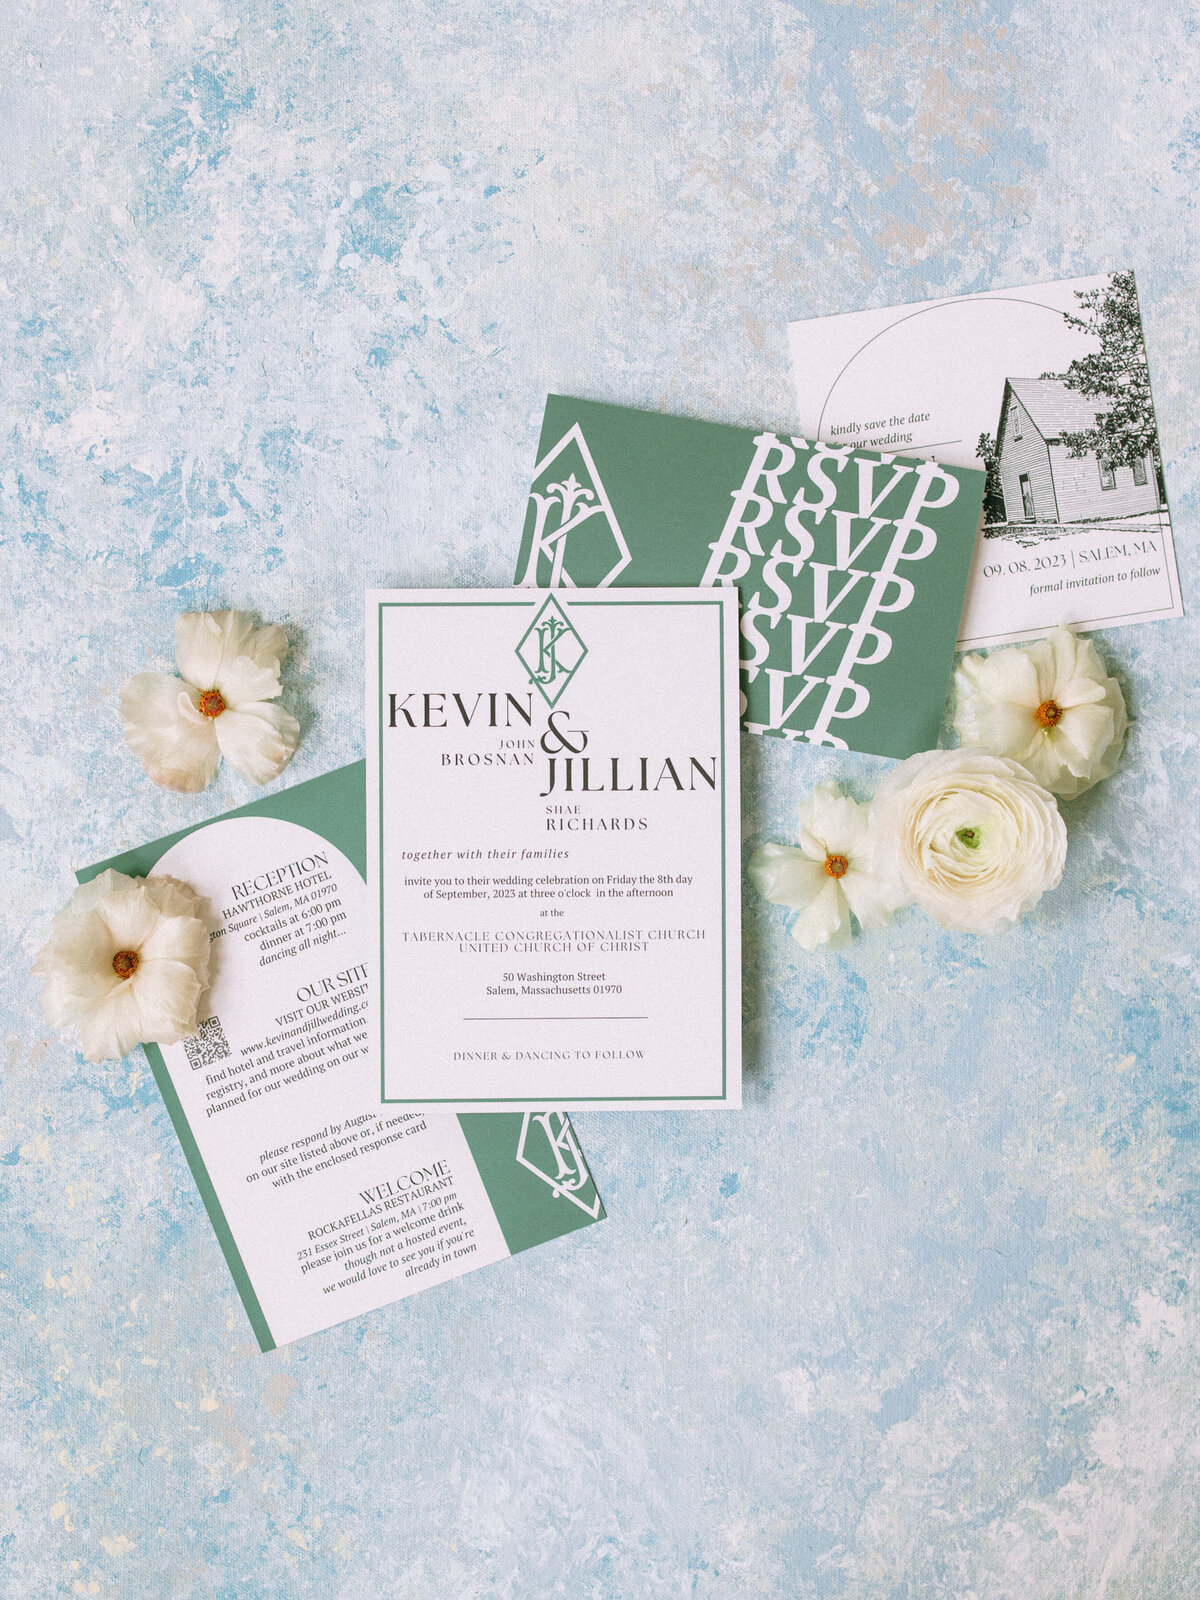 Green and white wedding invitation suite with white flowers on a light blue textured background